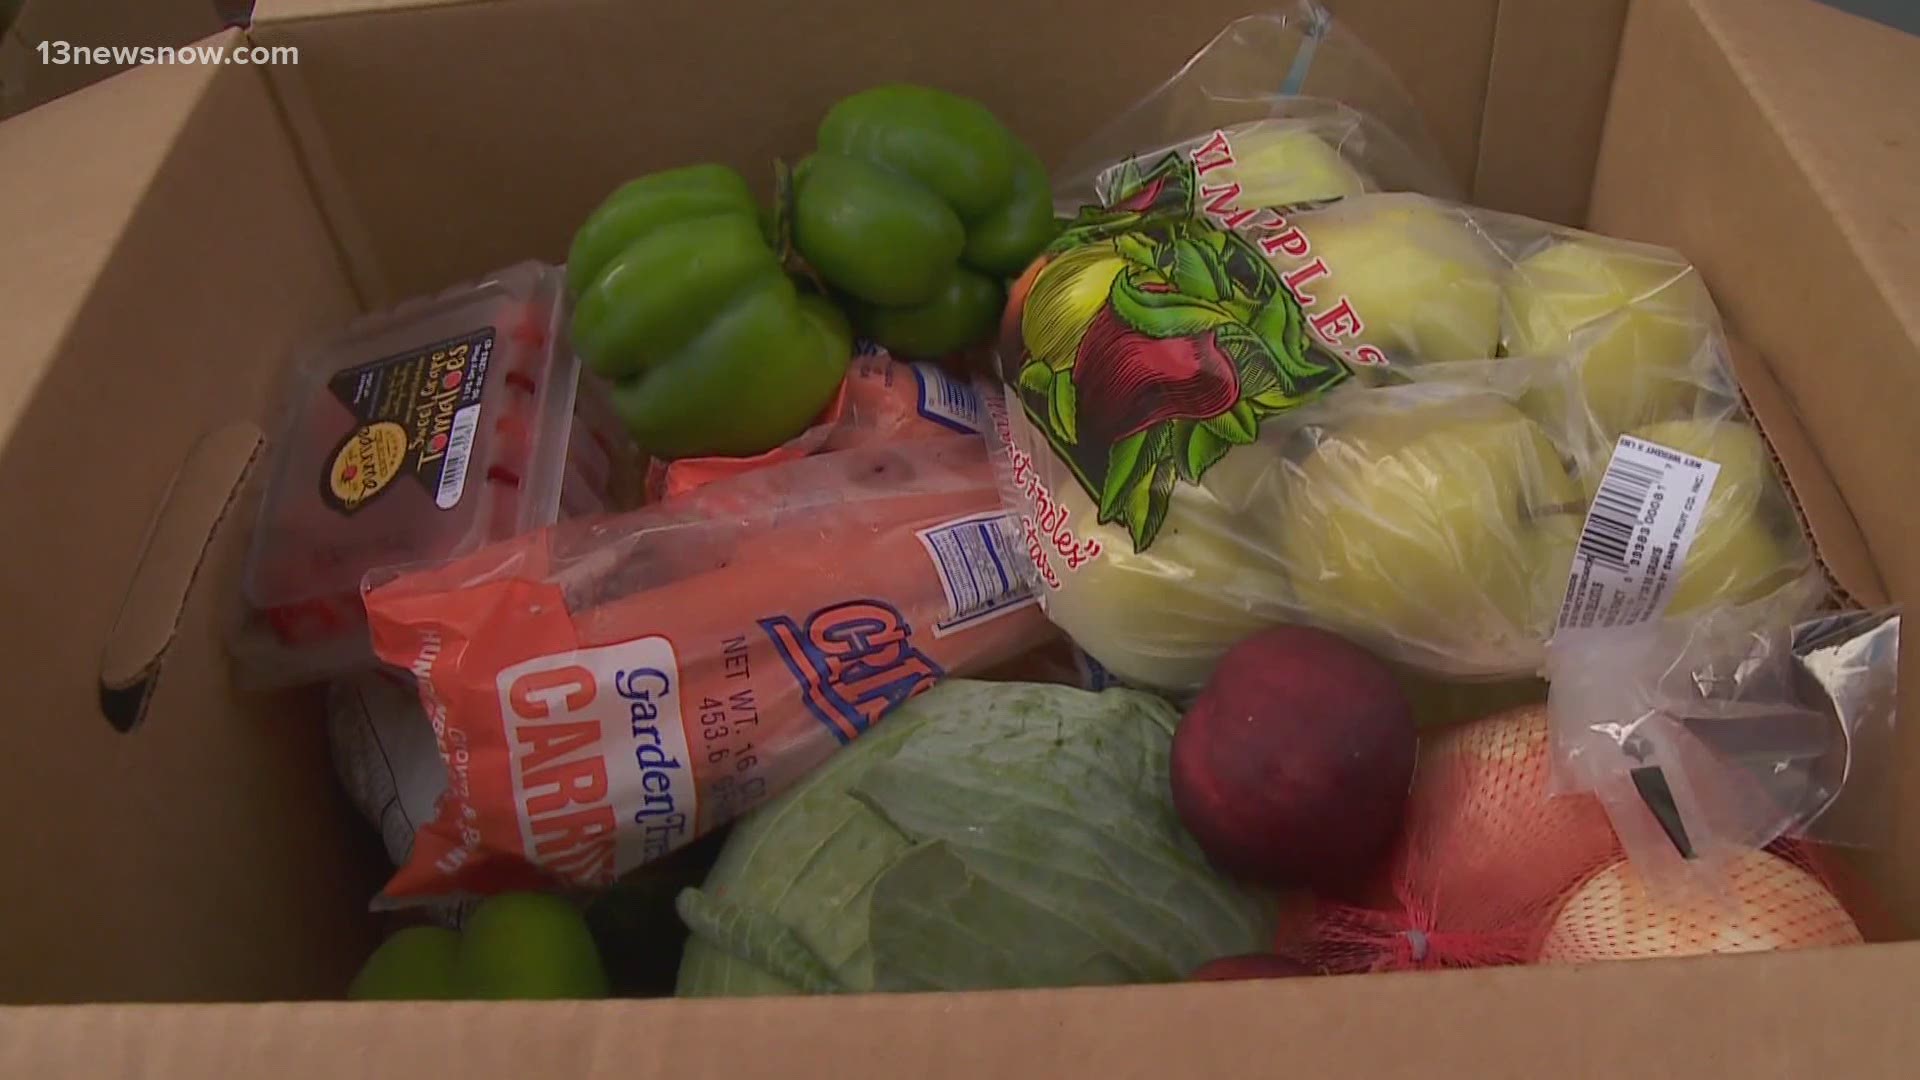 The fresh produce is intended for families in need. The Princess Anne High students gave out boxes today.